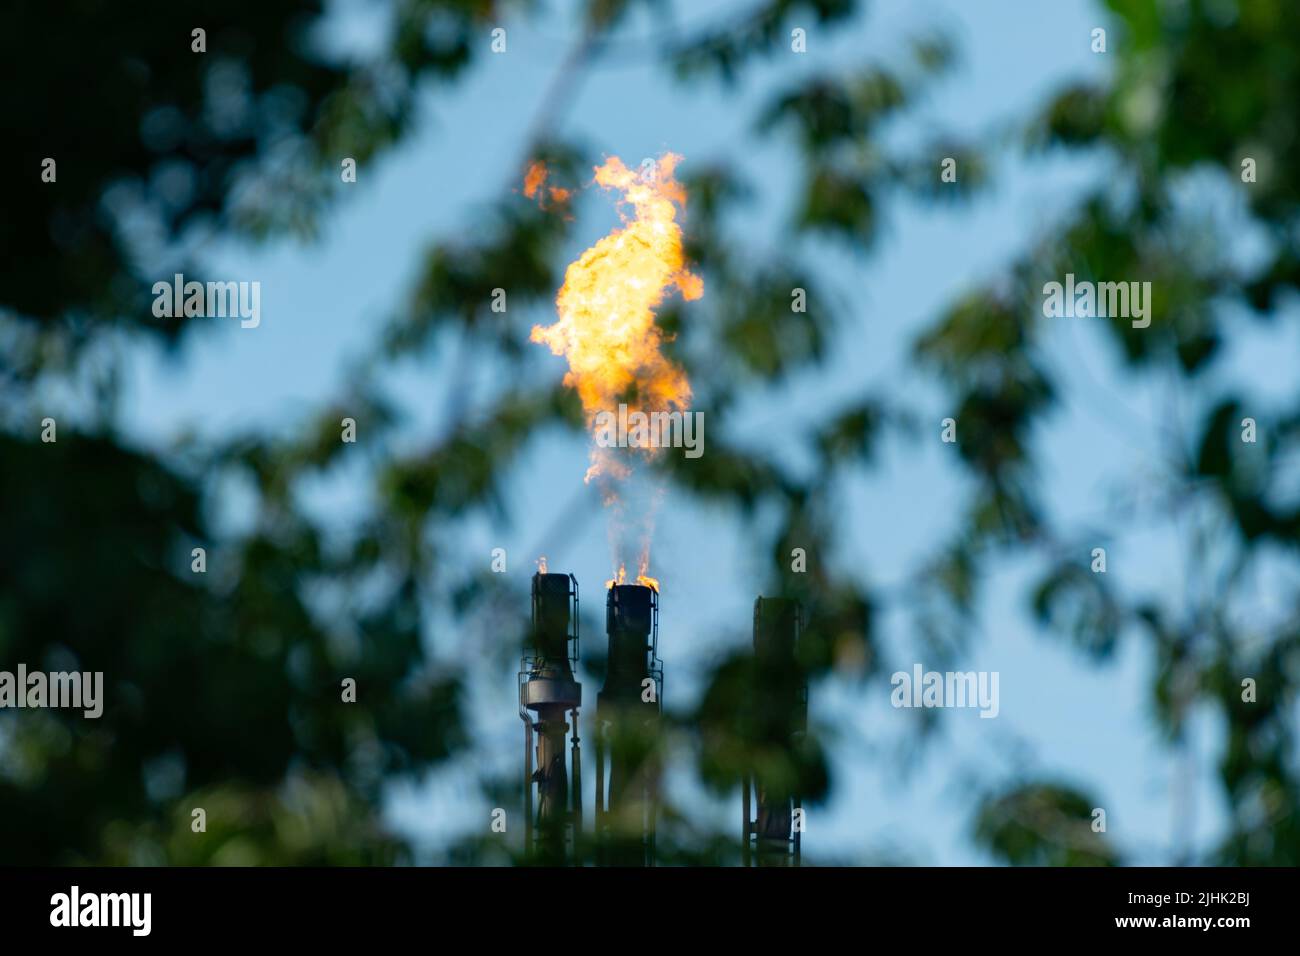 Oil refinery gas flare, flare stack burning off excess gas, viewed from behind a tree. Oil refinery flame, flare, flaring, chimney, pollution. UK Stock Photo